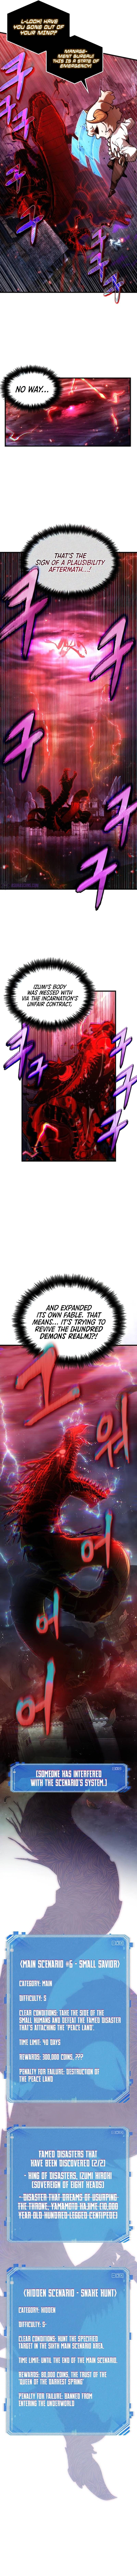 Omniscient Reader's Viewpoint Chapter 142 page 9 - MangaWeebs.in